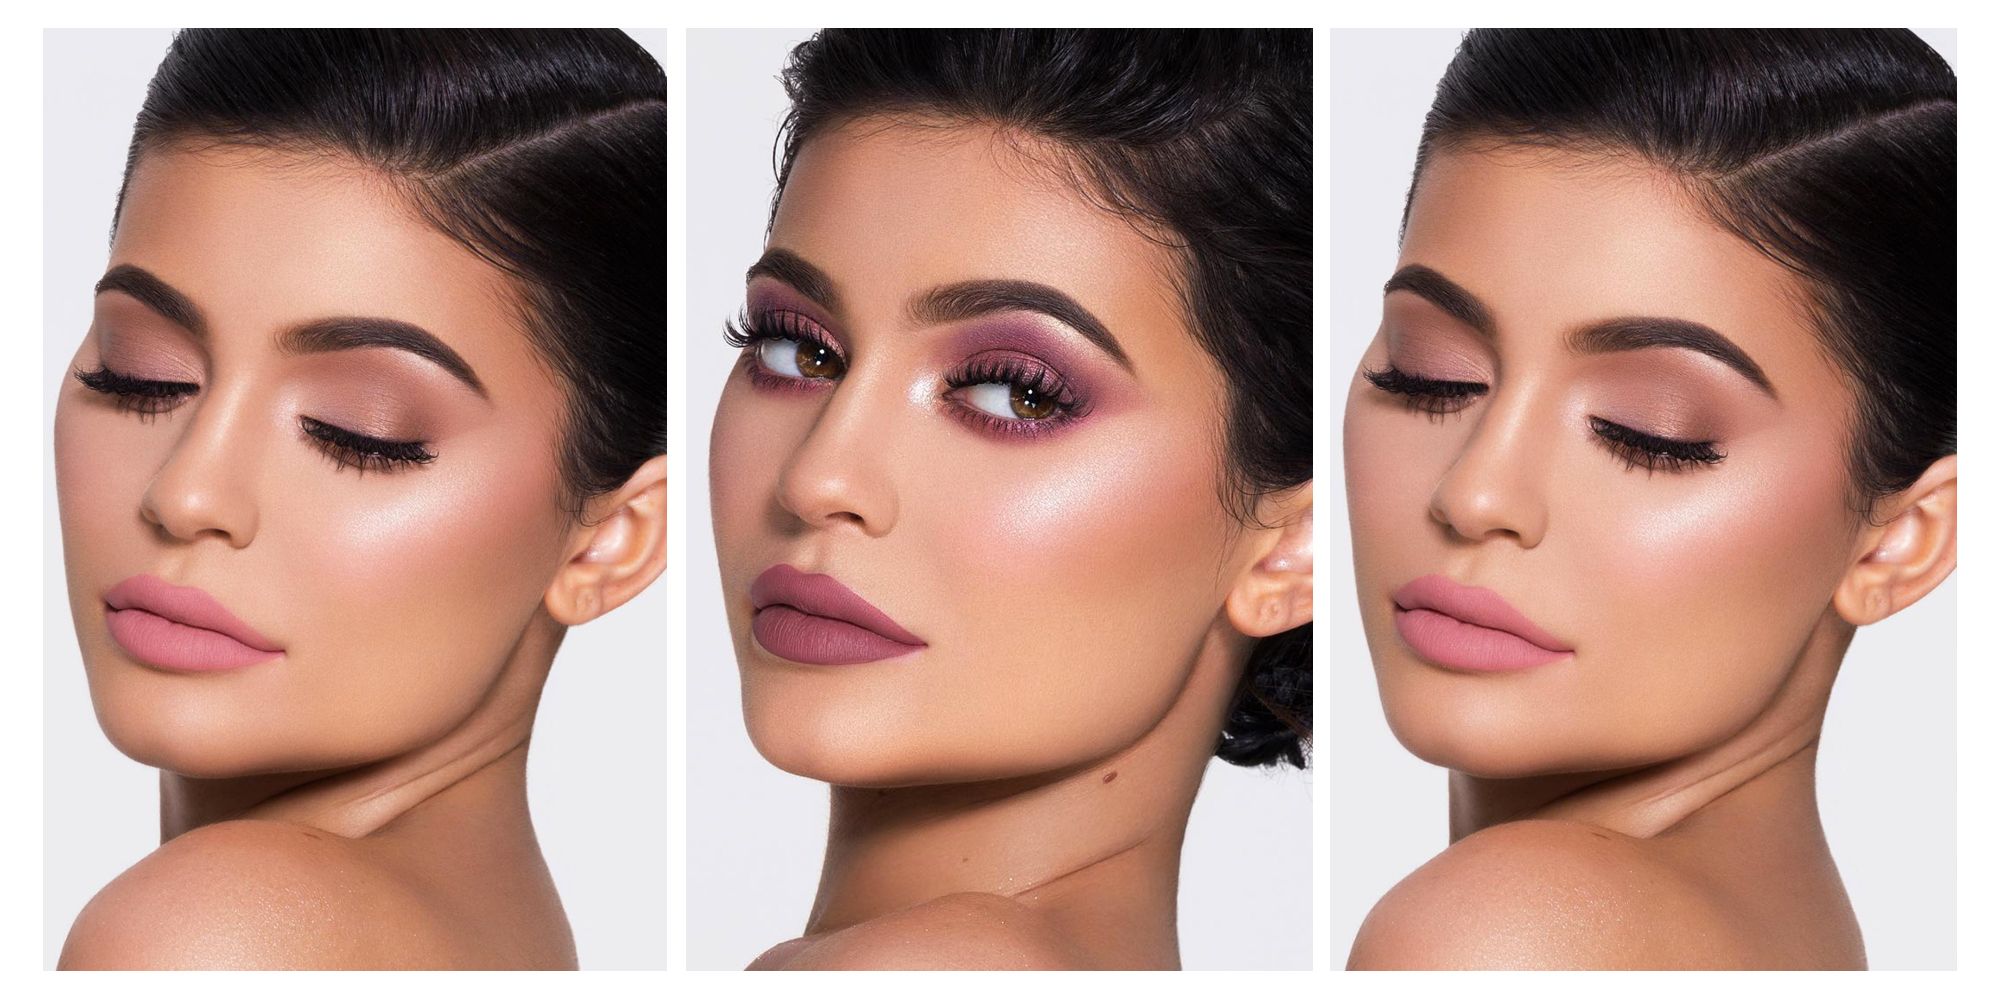 Kylie Cosmetics Makes $420 Million in 18 Months - Kylie Jenner on